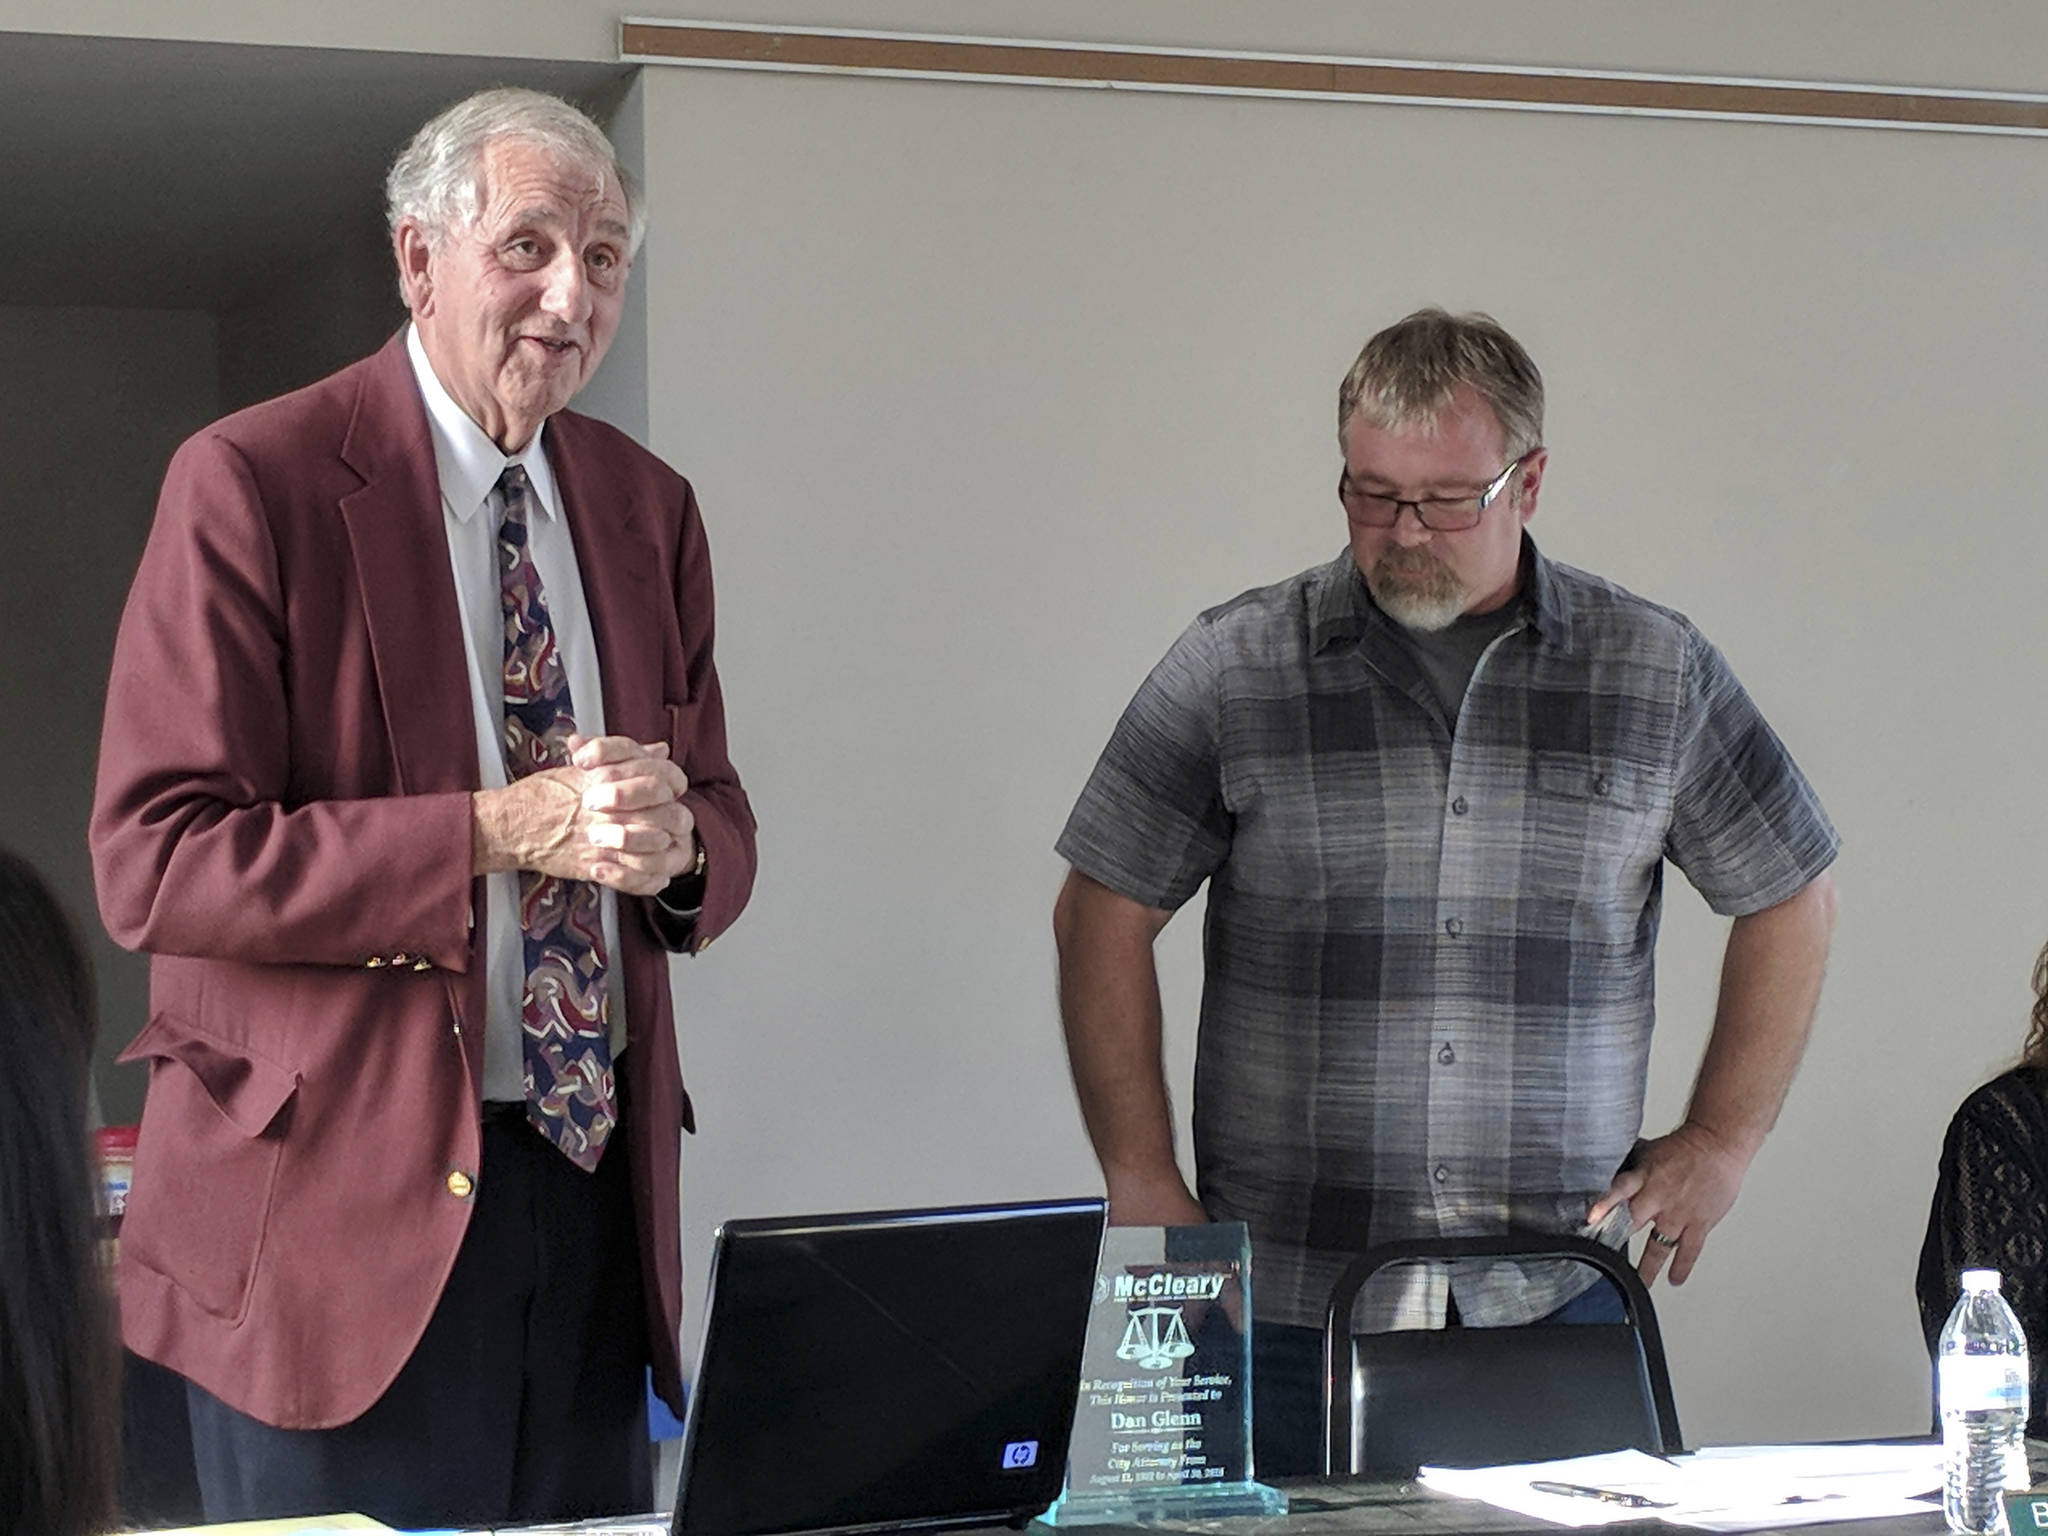 (Corey Morris | The Vidette) City attorney Dan Glenn, left, was lauded for his years of service during a recent McCleary City Council meeting.